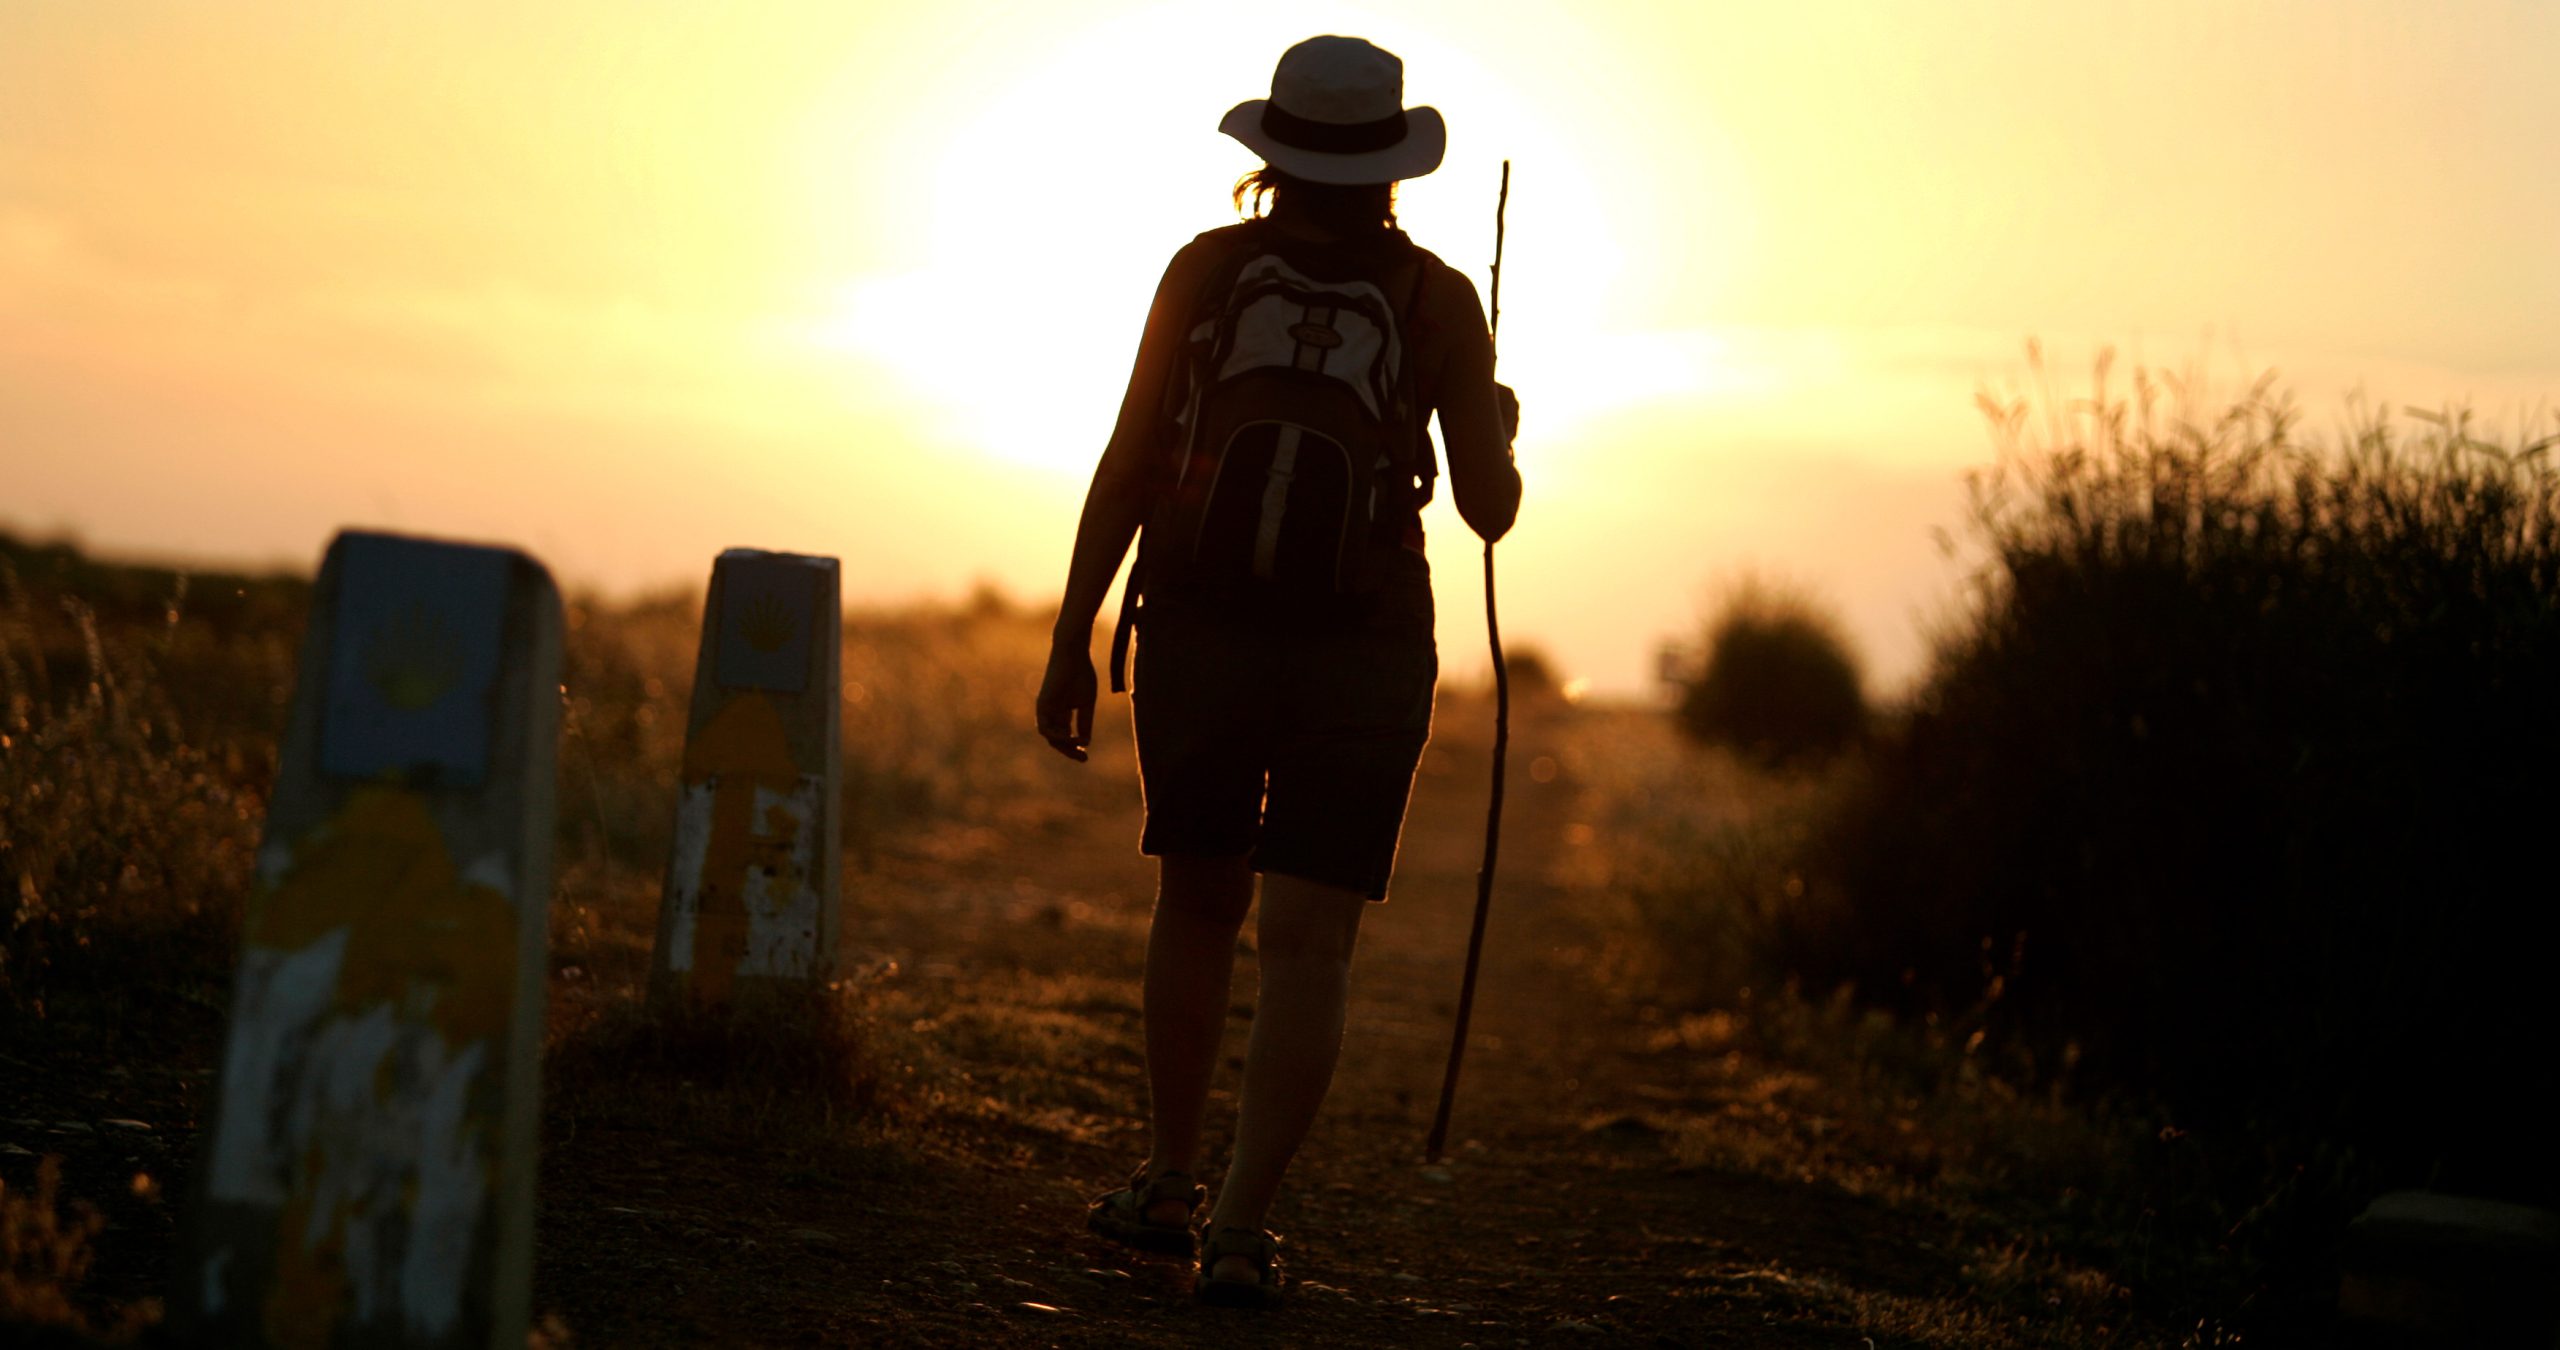 Featured image for “Walk the Camino 2022”